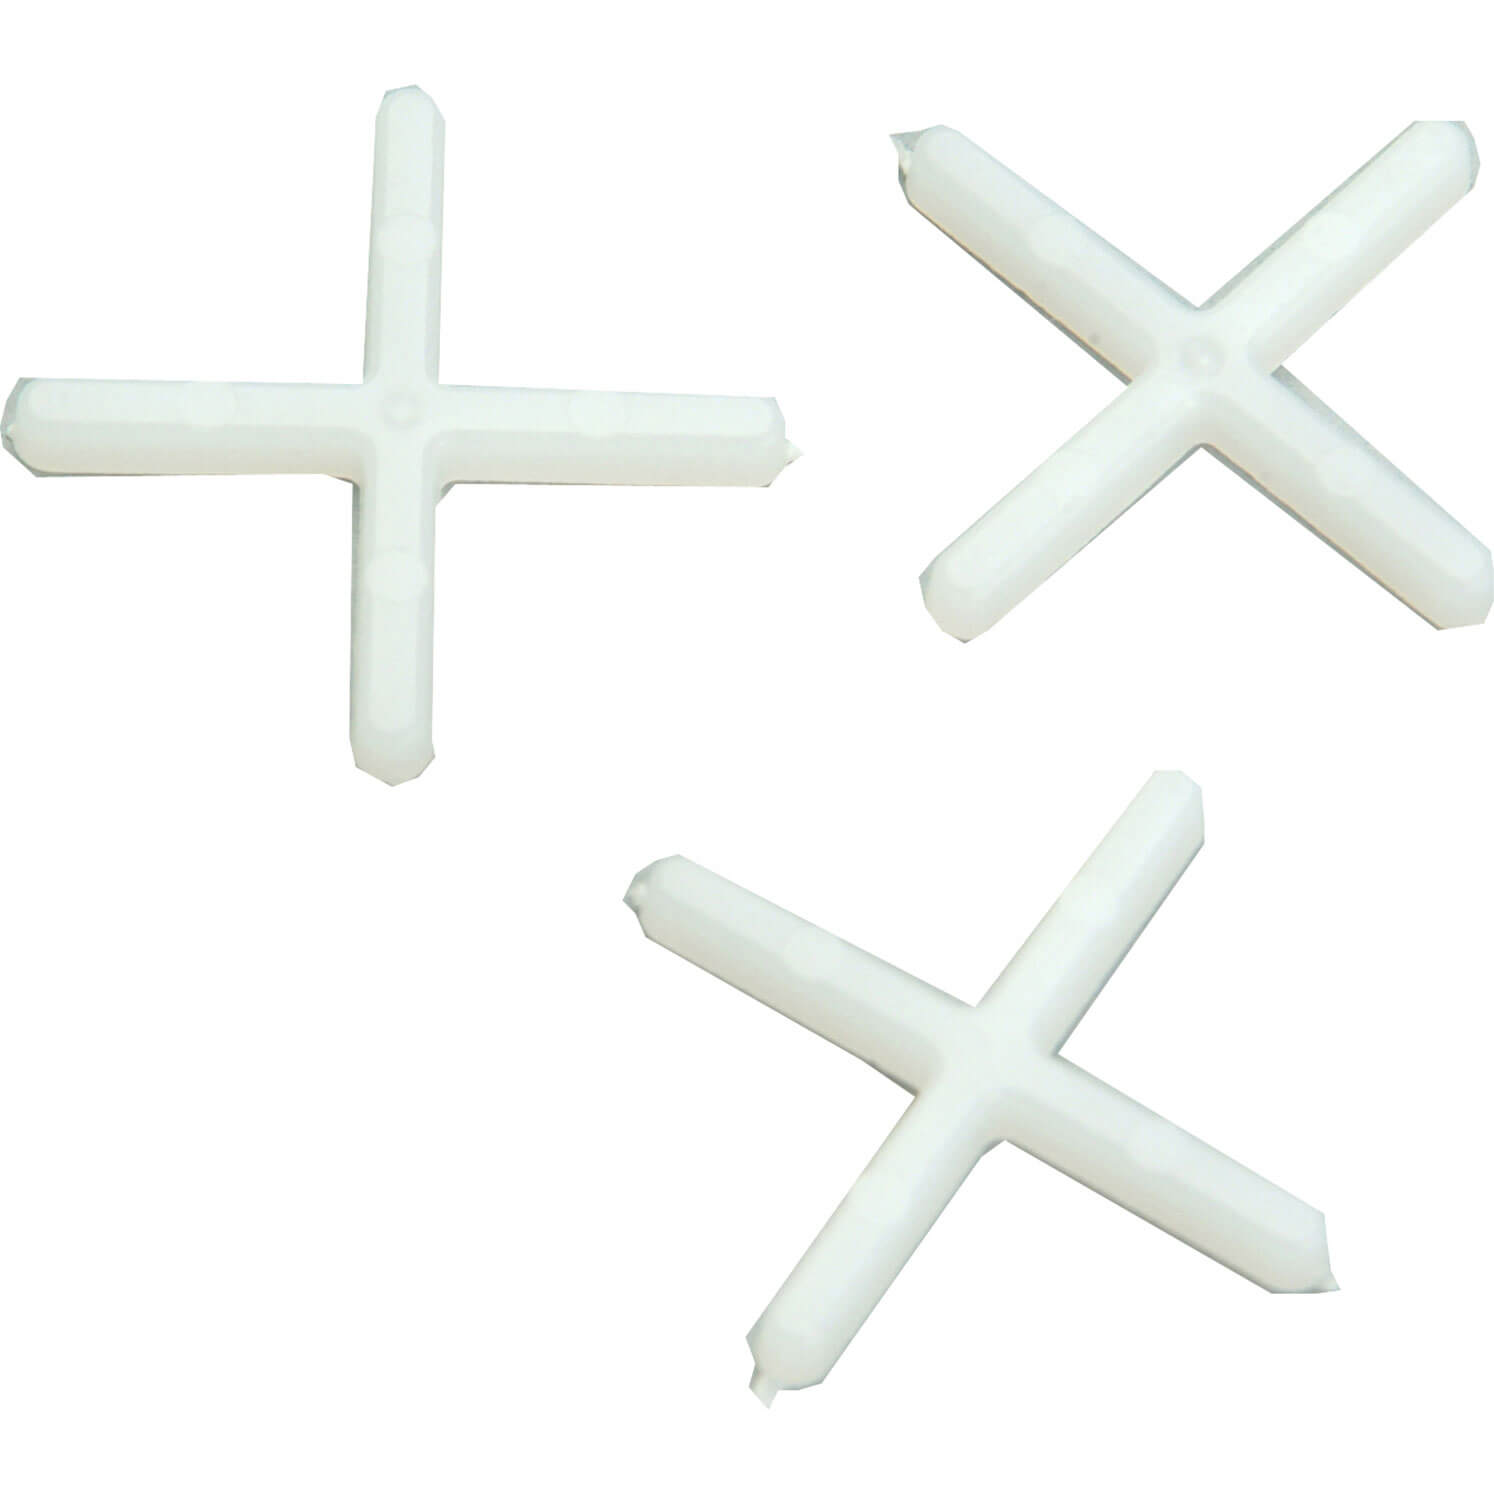 Photo of Vitrex Plastic Wall Tile Spacers 1.5mm Pack Of 250